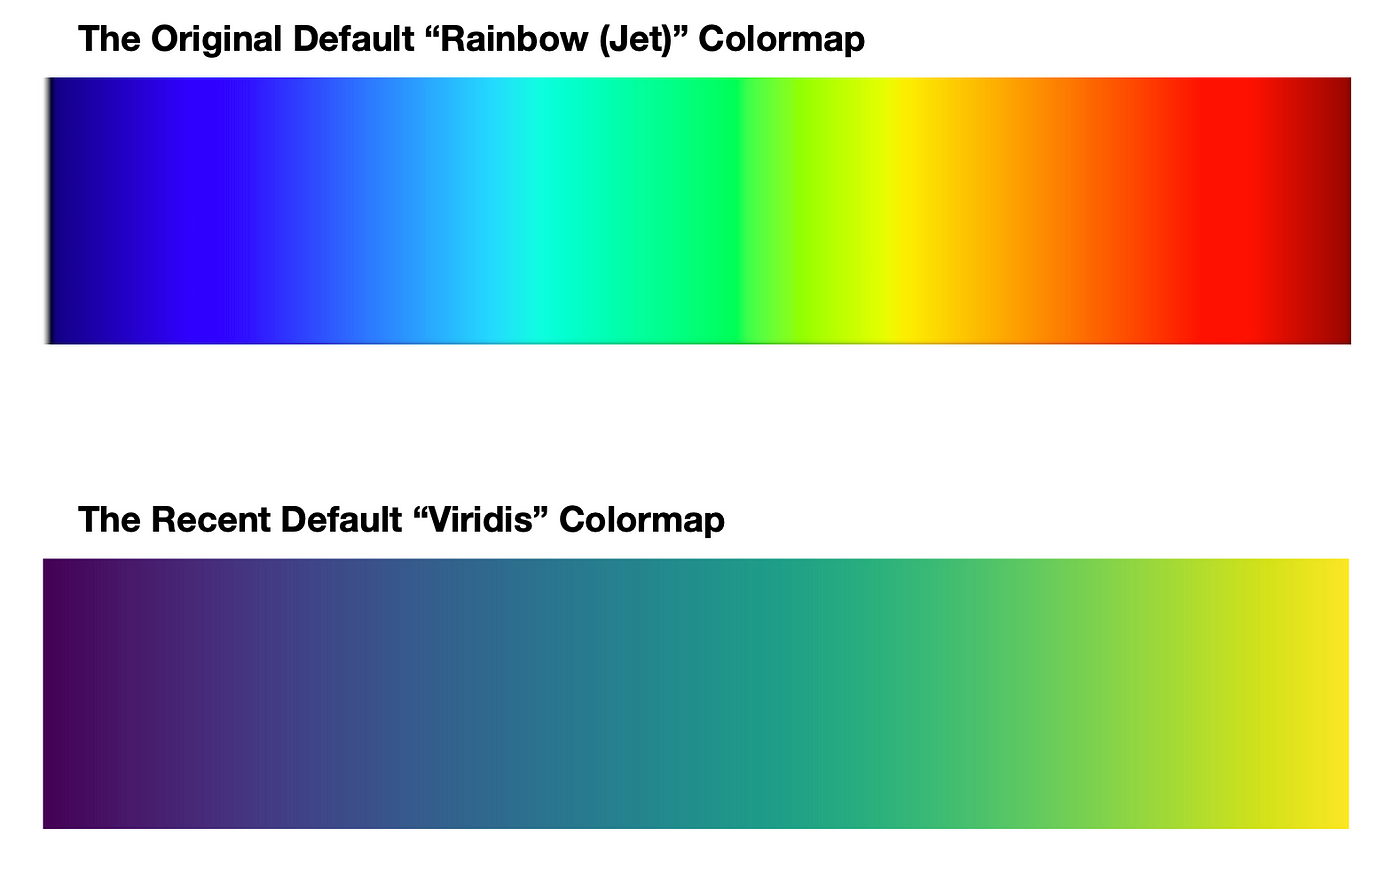 A standard RGB-based color scale and a rainbow color scale.